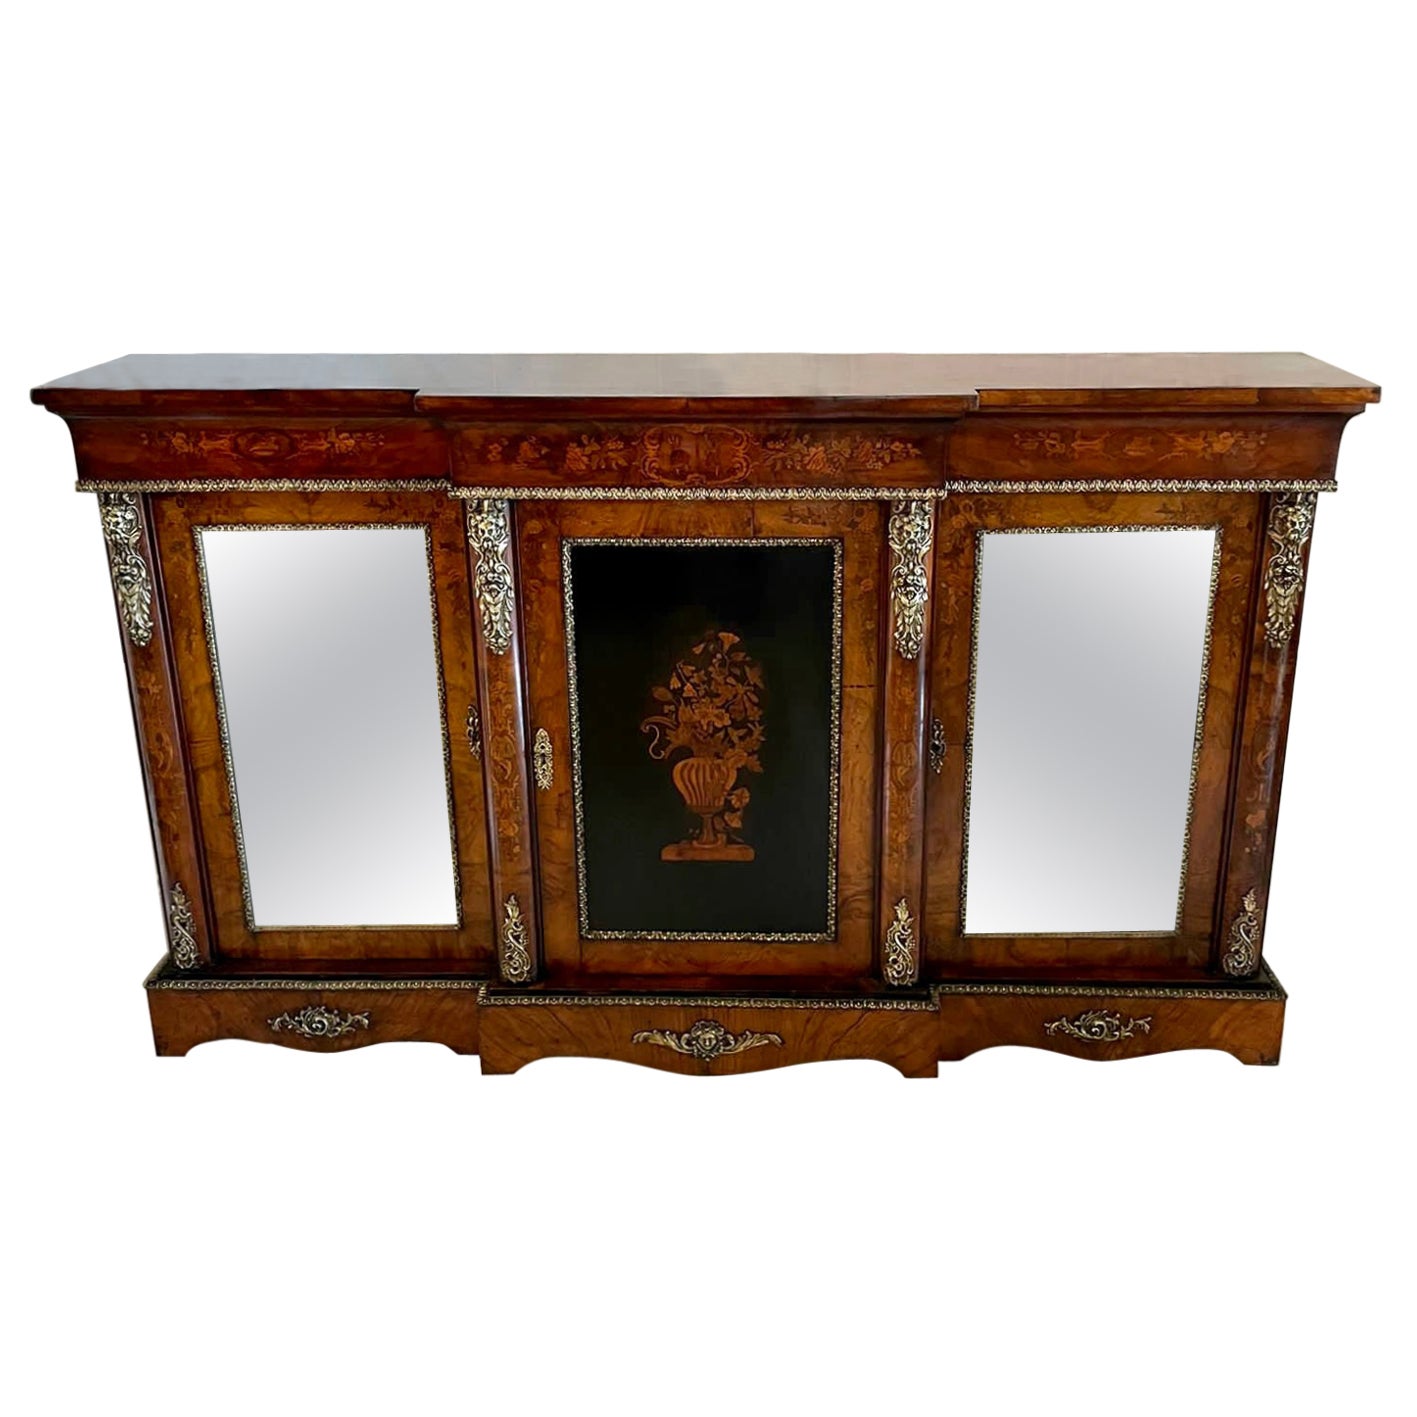 Outstanding Large Antique Inlaid Floral Marquetry Burr Walnut Credenza/Sideboard For Sale